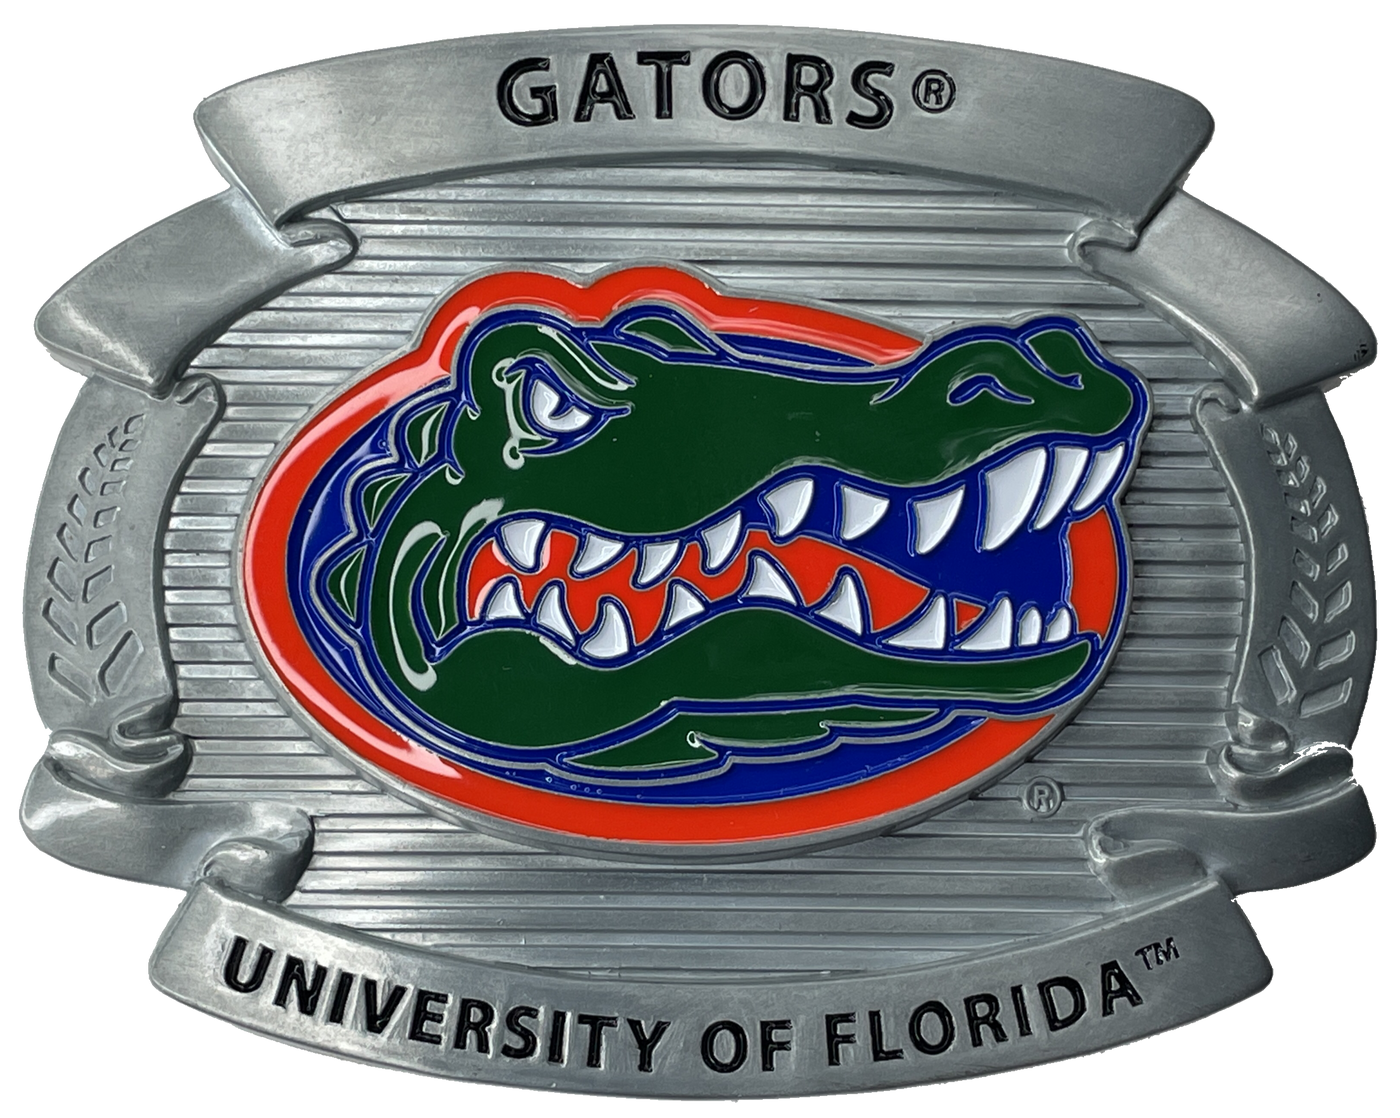 Fully cast metal buckle that features expertly enameled details. Orange, Green and Blue enameled "Gator" logo with text that reads "Gators" and "University of Florida". Available online or at our shop just outside Nashville in Smyrna, TN.  Officially licensed collegiate product A full 4 inches wide Fits belts up to 2" wide. Vibrant enameled team colors Fully metal belt buckle